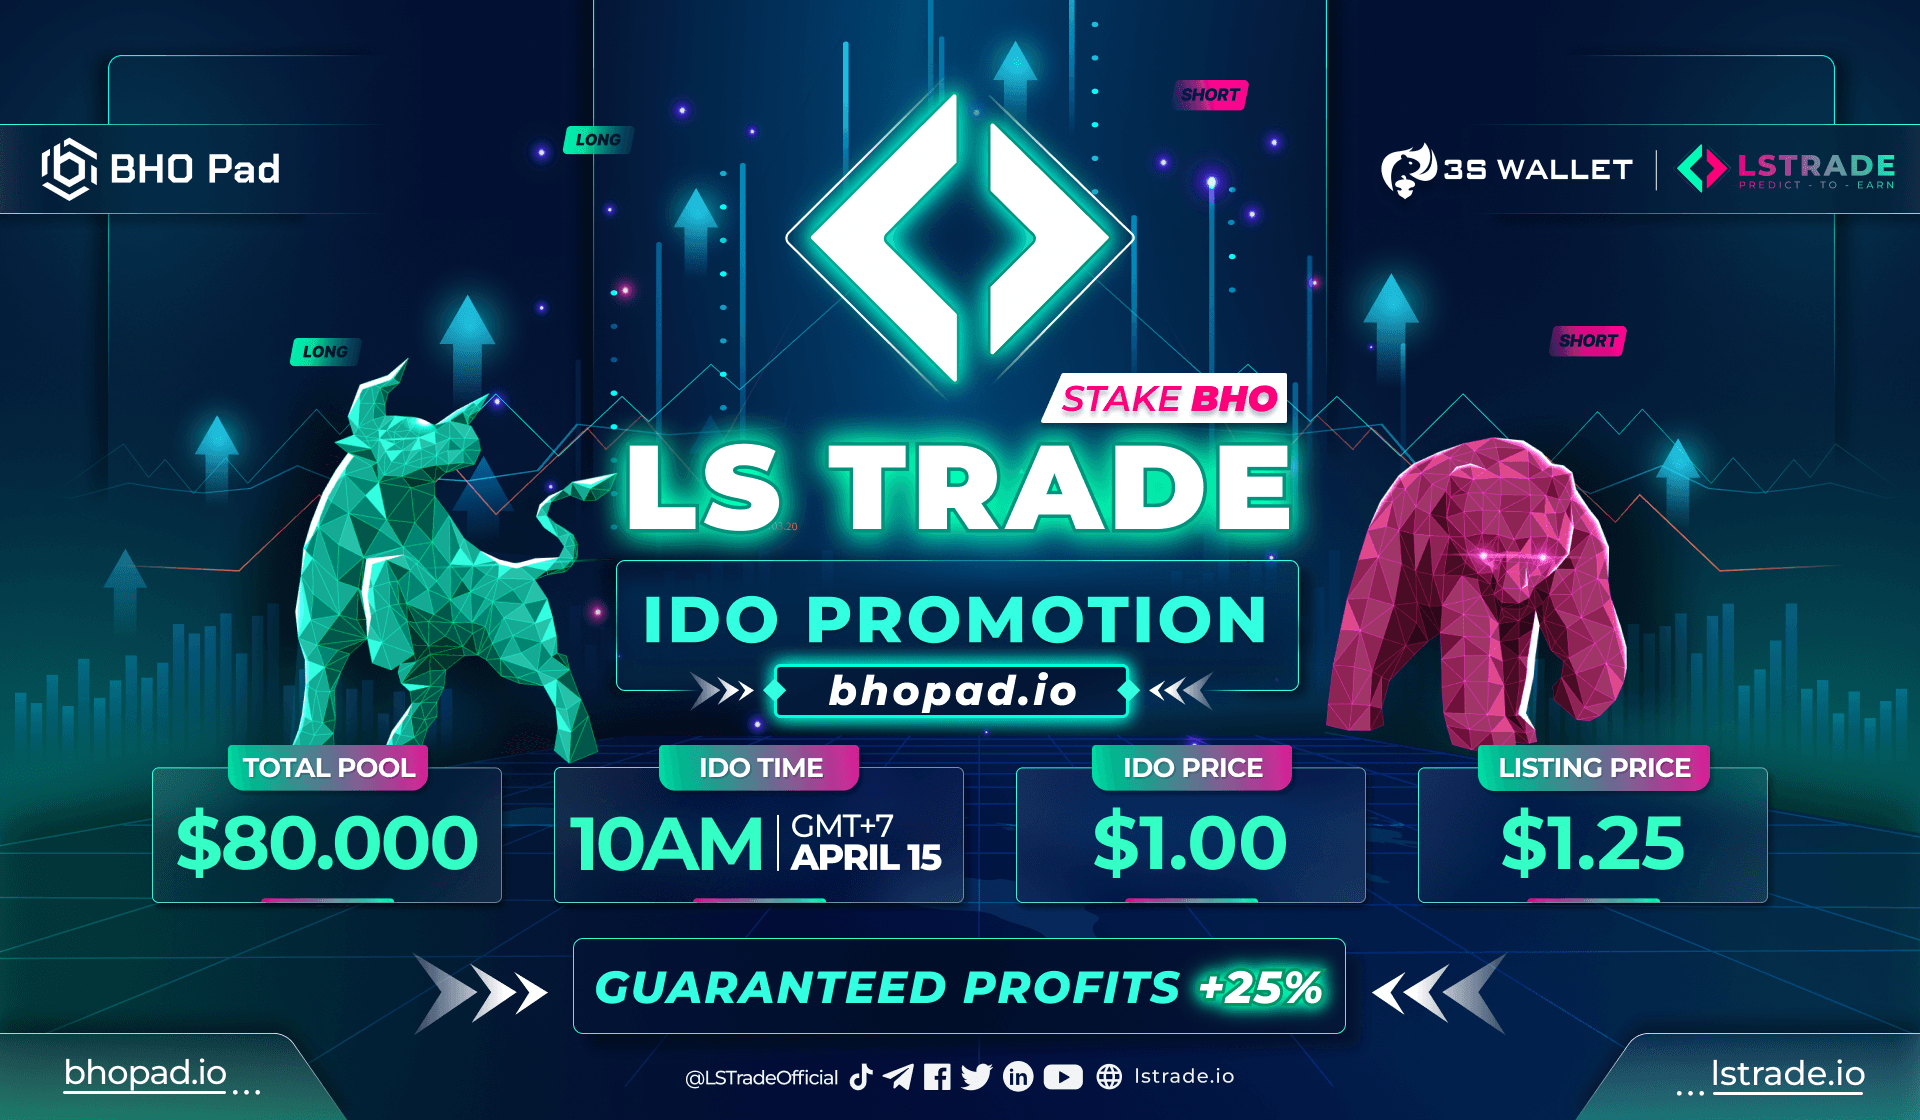 LS TRADE: INFORMATION FOR IDO PROMOTION ON BHOPAD.IO (BHO STAKING & REGISTRATION REQUIRED)